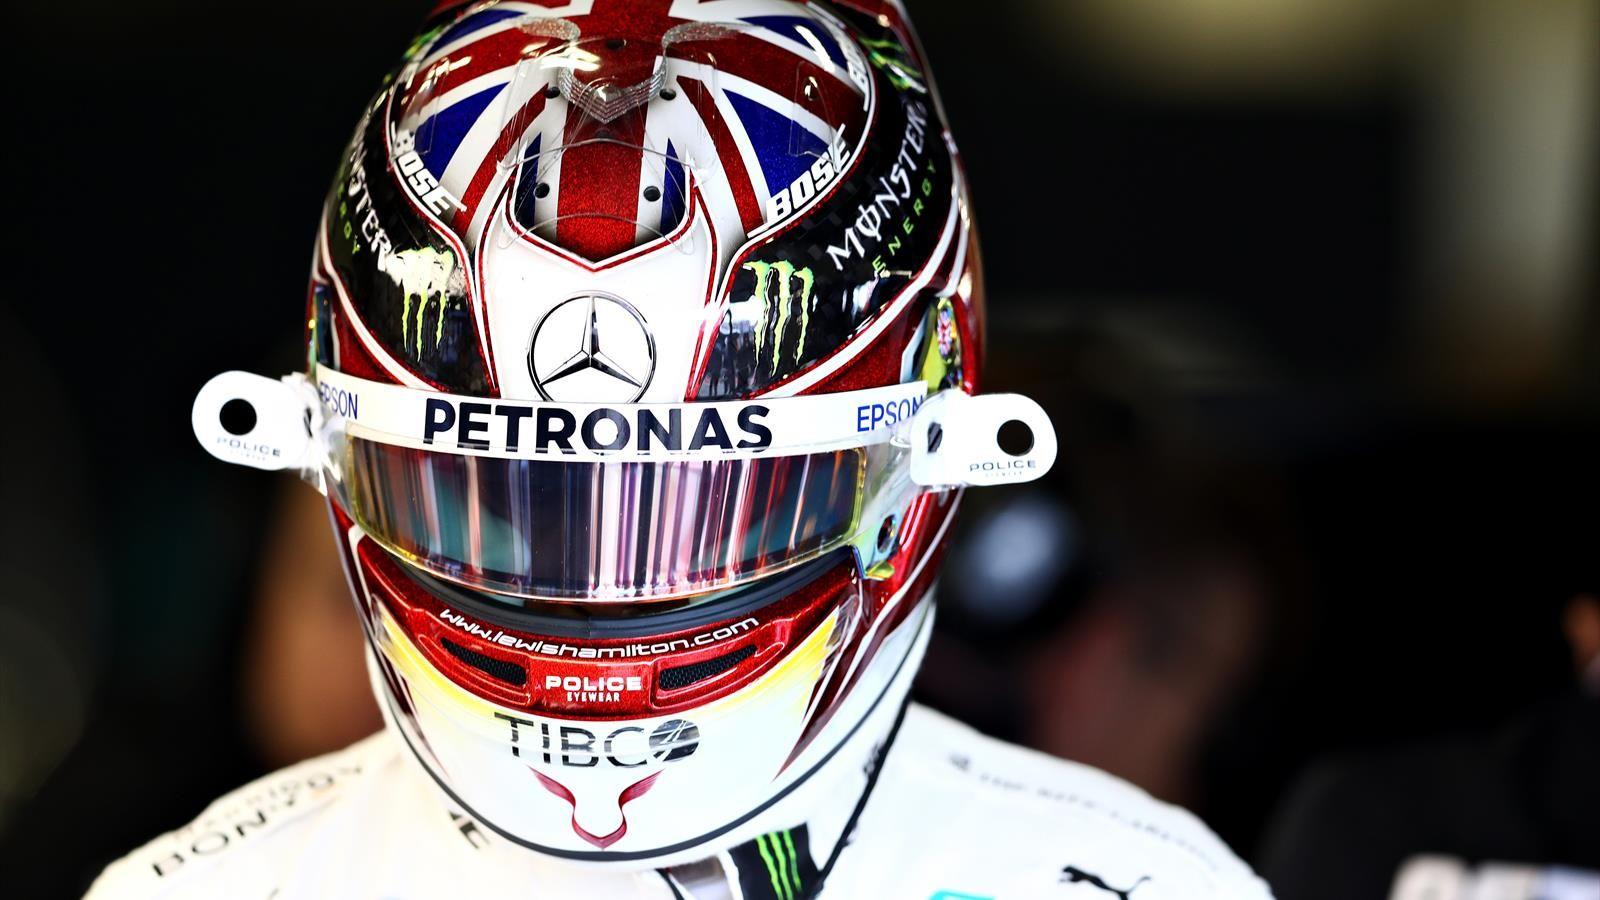 Hamilton defends his 'Britishness' ahead of home race